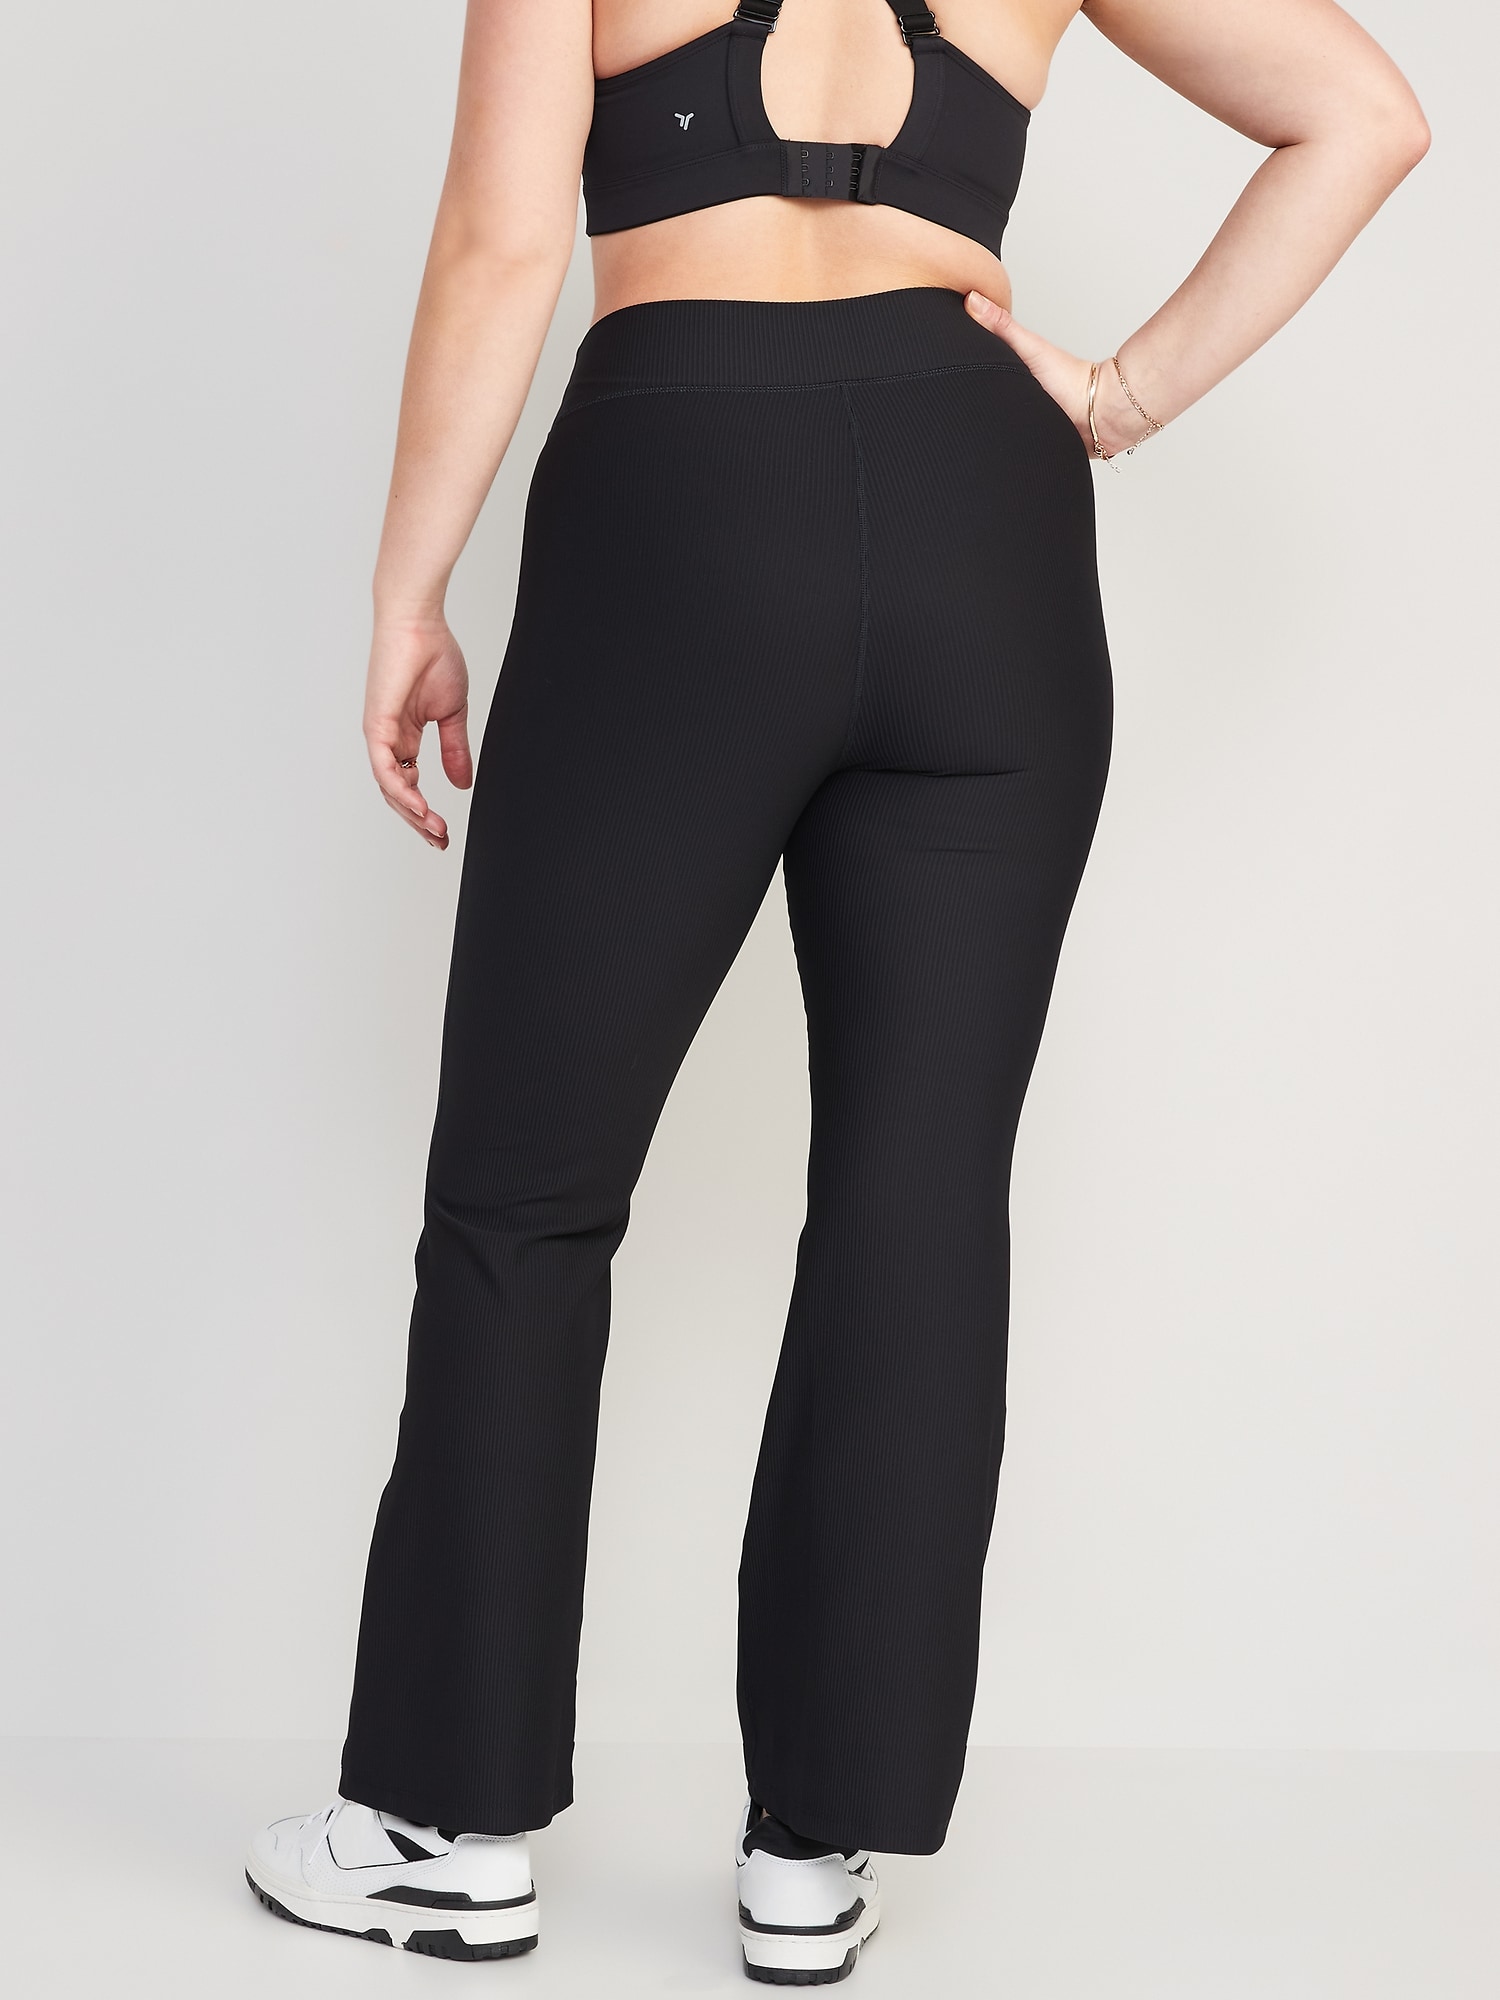 Extra High-Waisted PowerSoft Flare Leggings | Old Navy